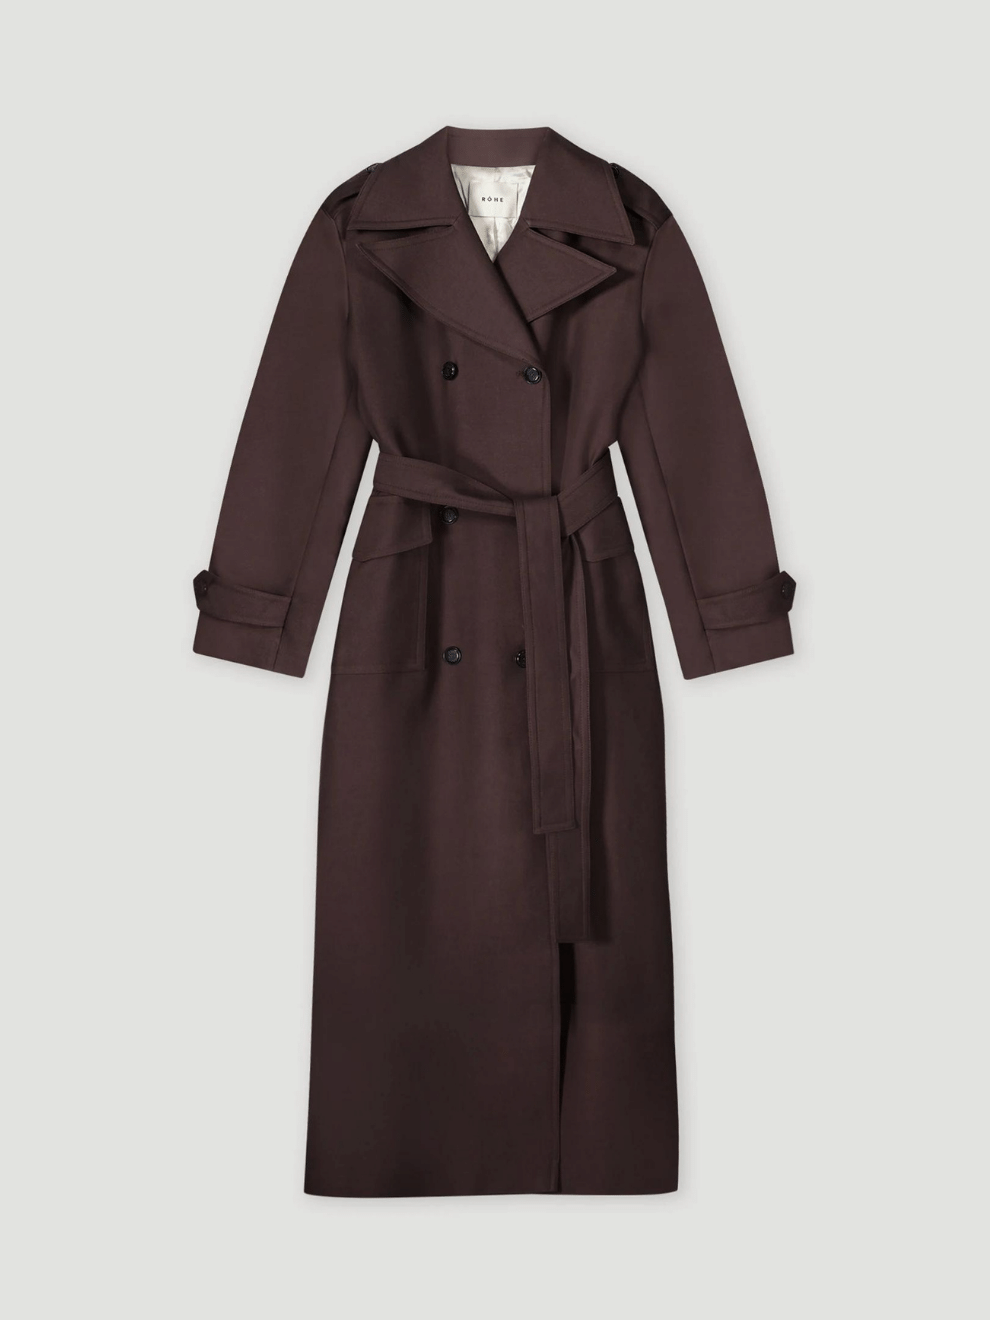 Claire Coat in Pure Chocolate